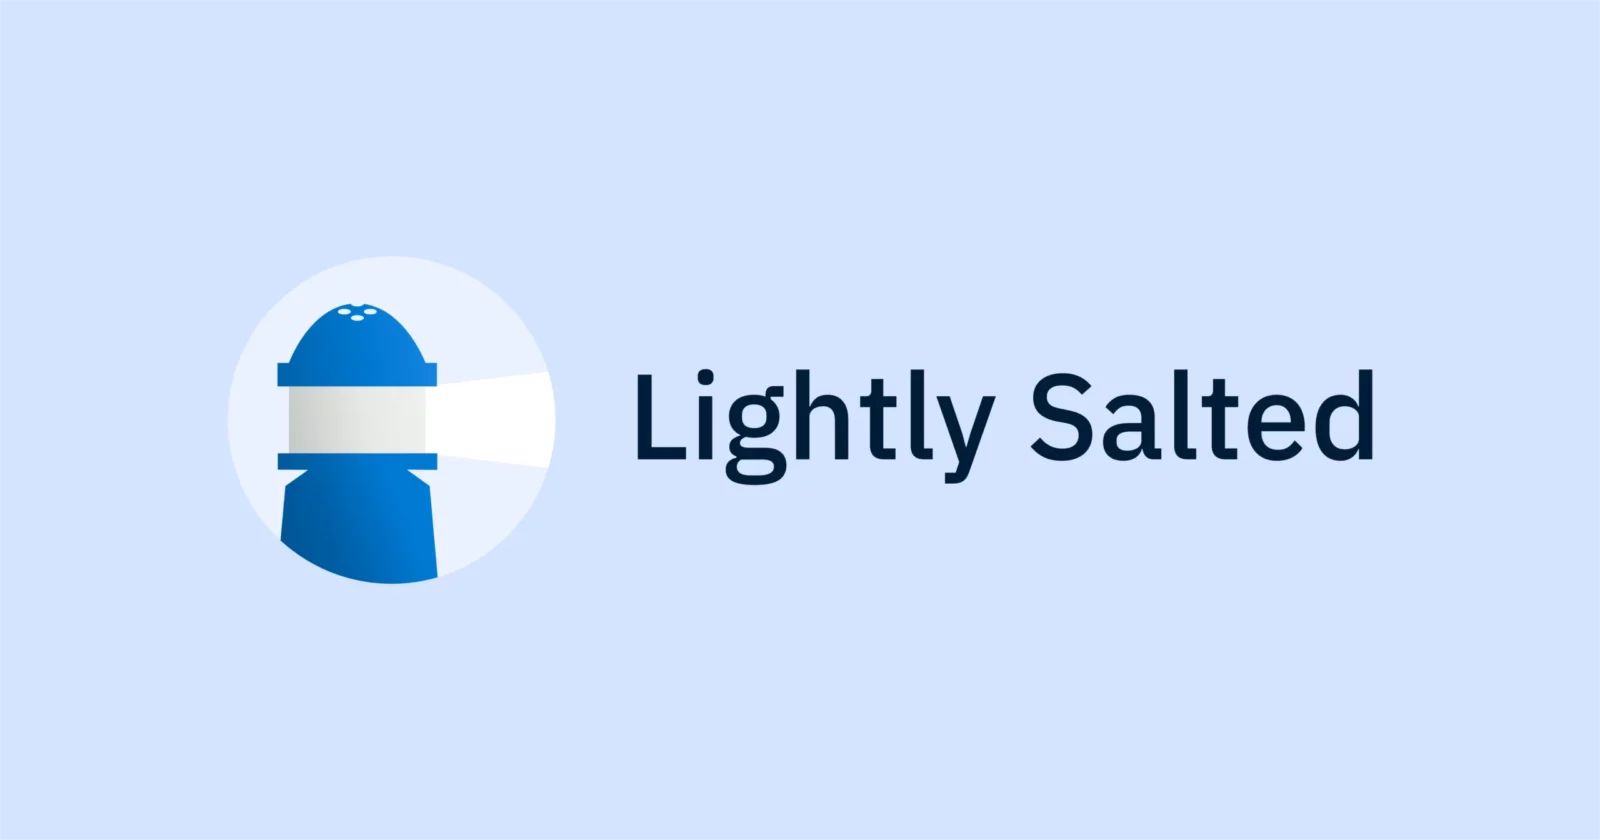 Lightly Salted offer web design and SEO for D2M's clients